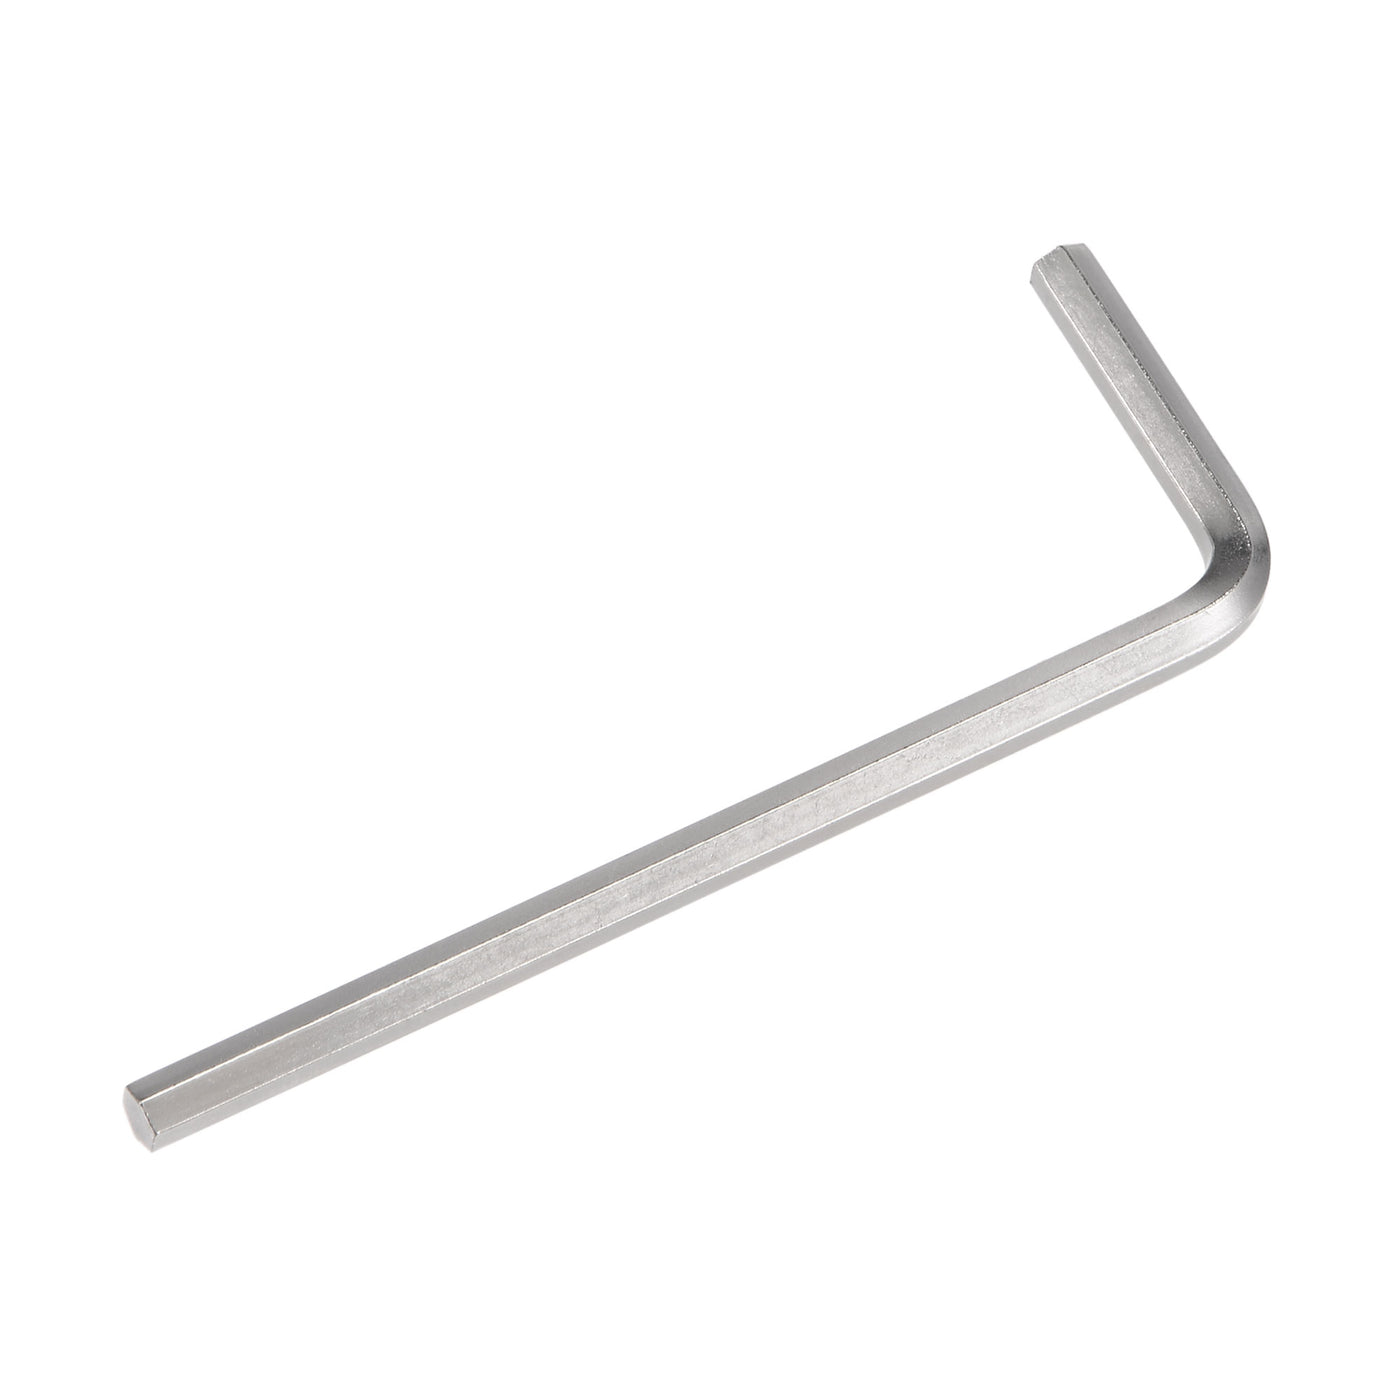 uxcell Uxcell Hex Key Wrench, L Shaped Long Arm CR-V Repairing Tools